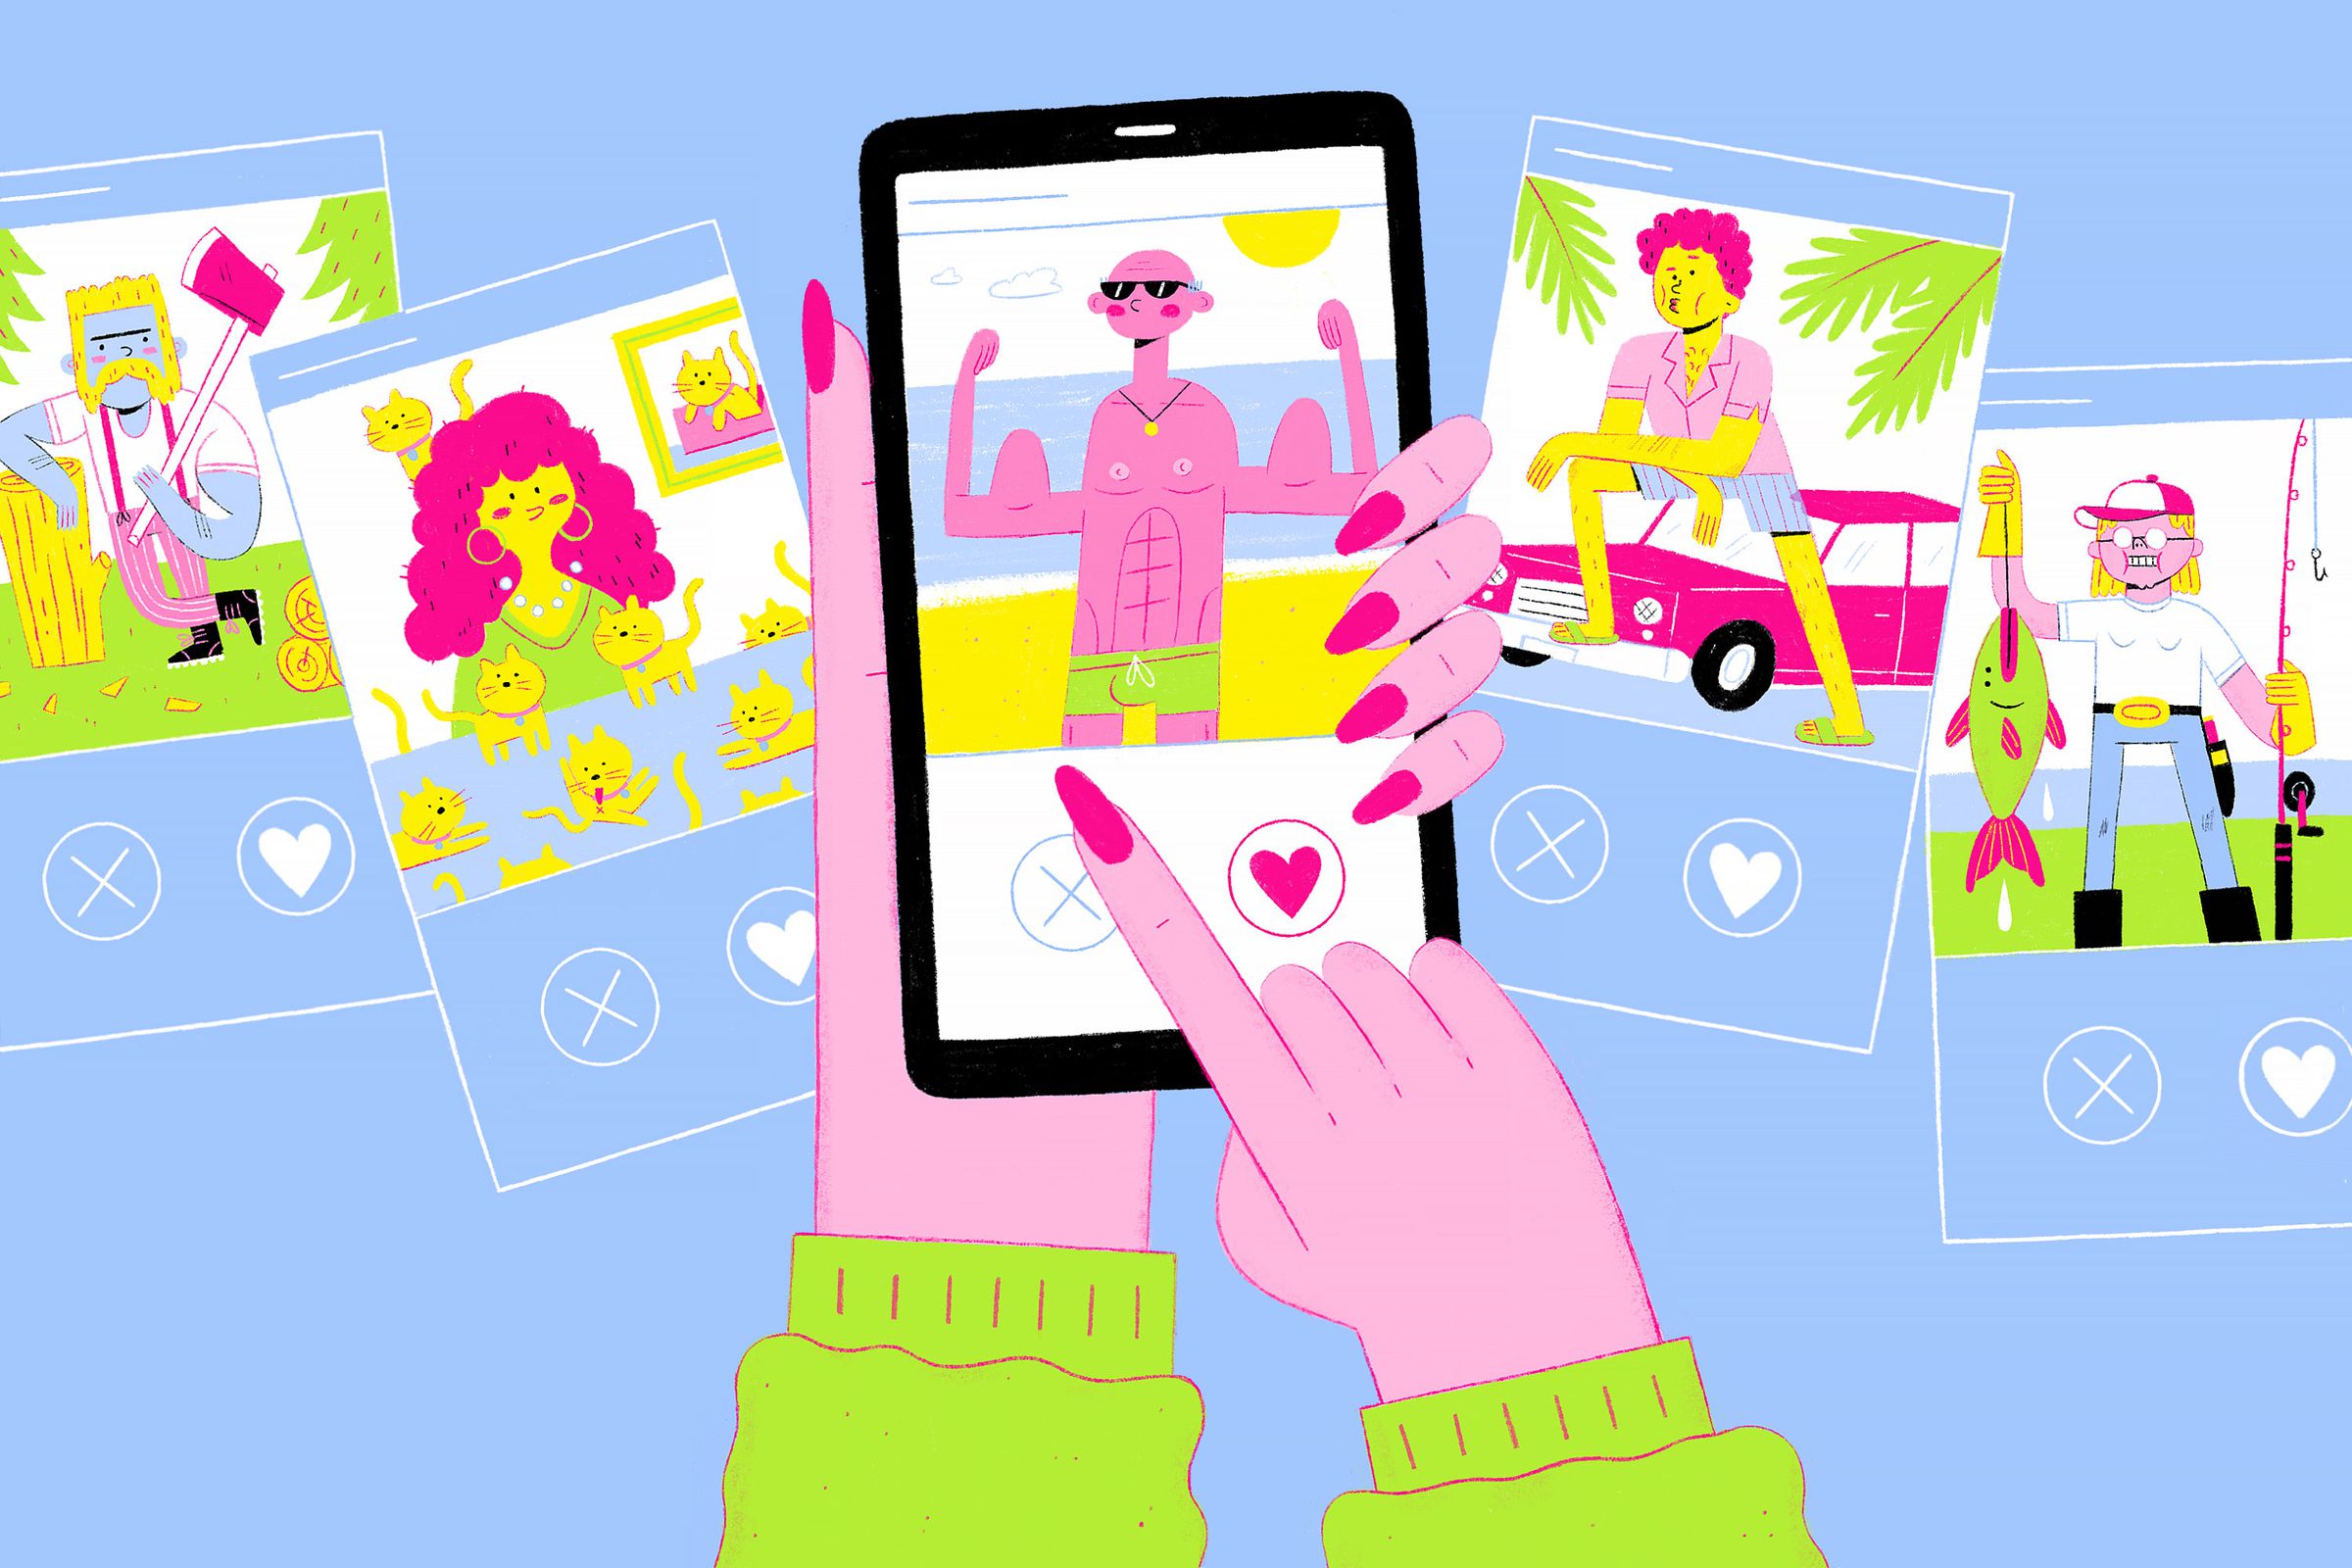 An illustration showing different profiles from a dating app, with heart and X buttons underneath. A finger hovers over a photo of a silly looking buff man. The other screens show a lumberjack, a woman with cats, a woman fishing, and a man chilling on a car.